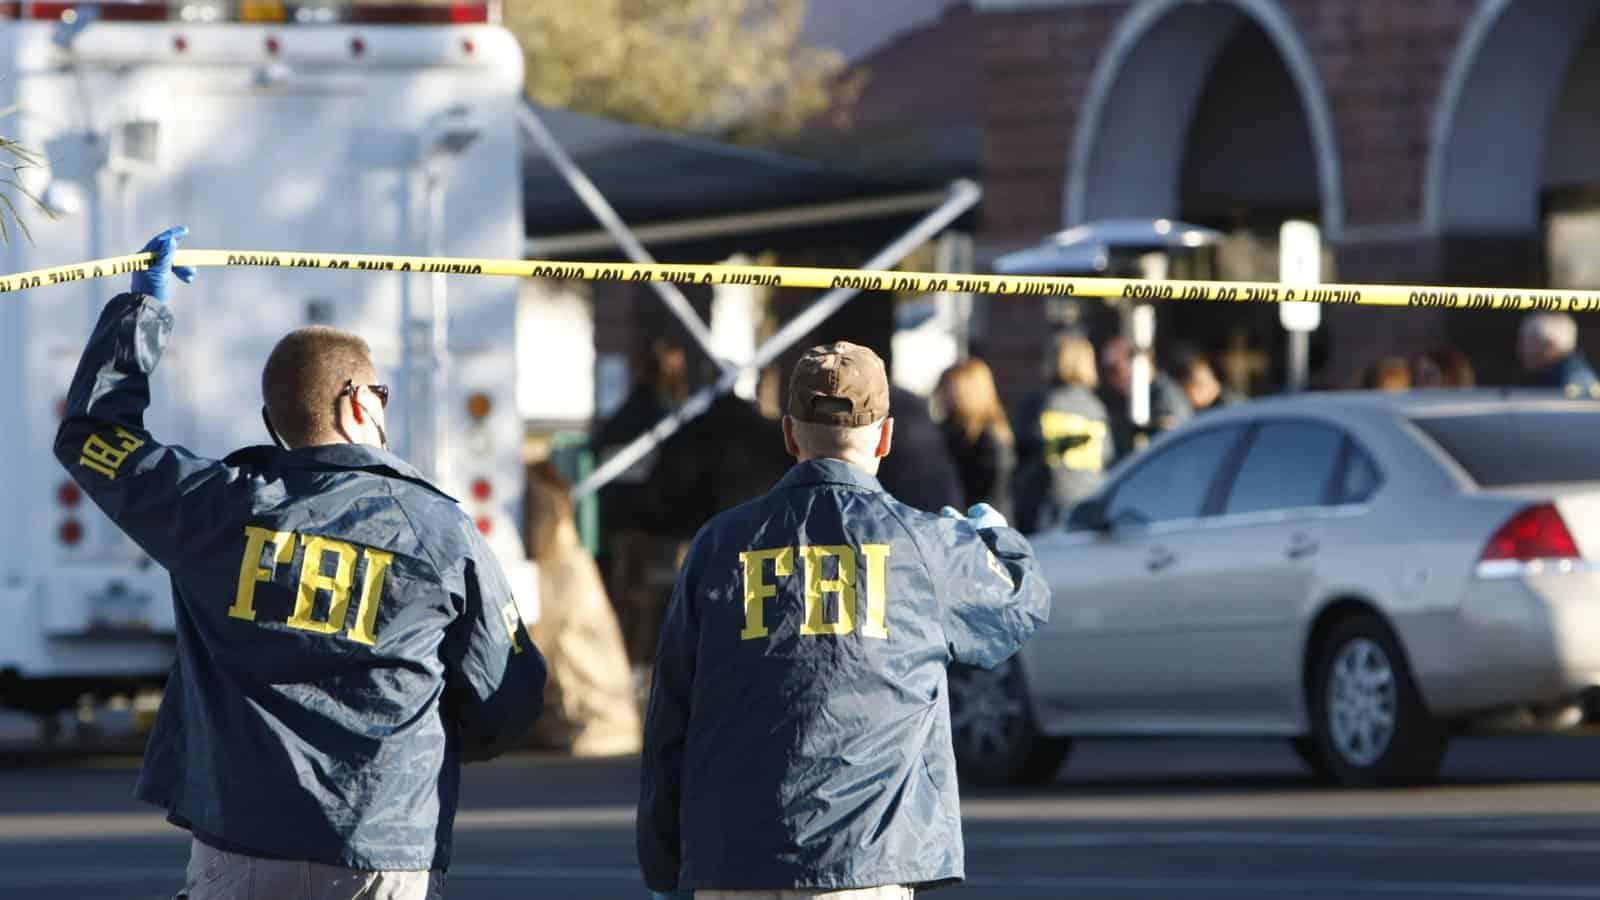 The plan to kill police decoded by the FBI